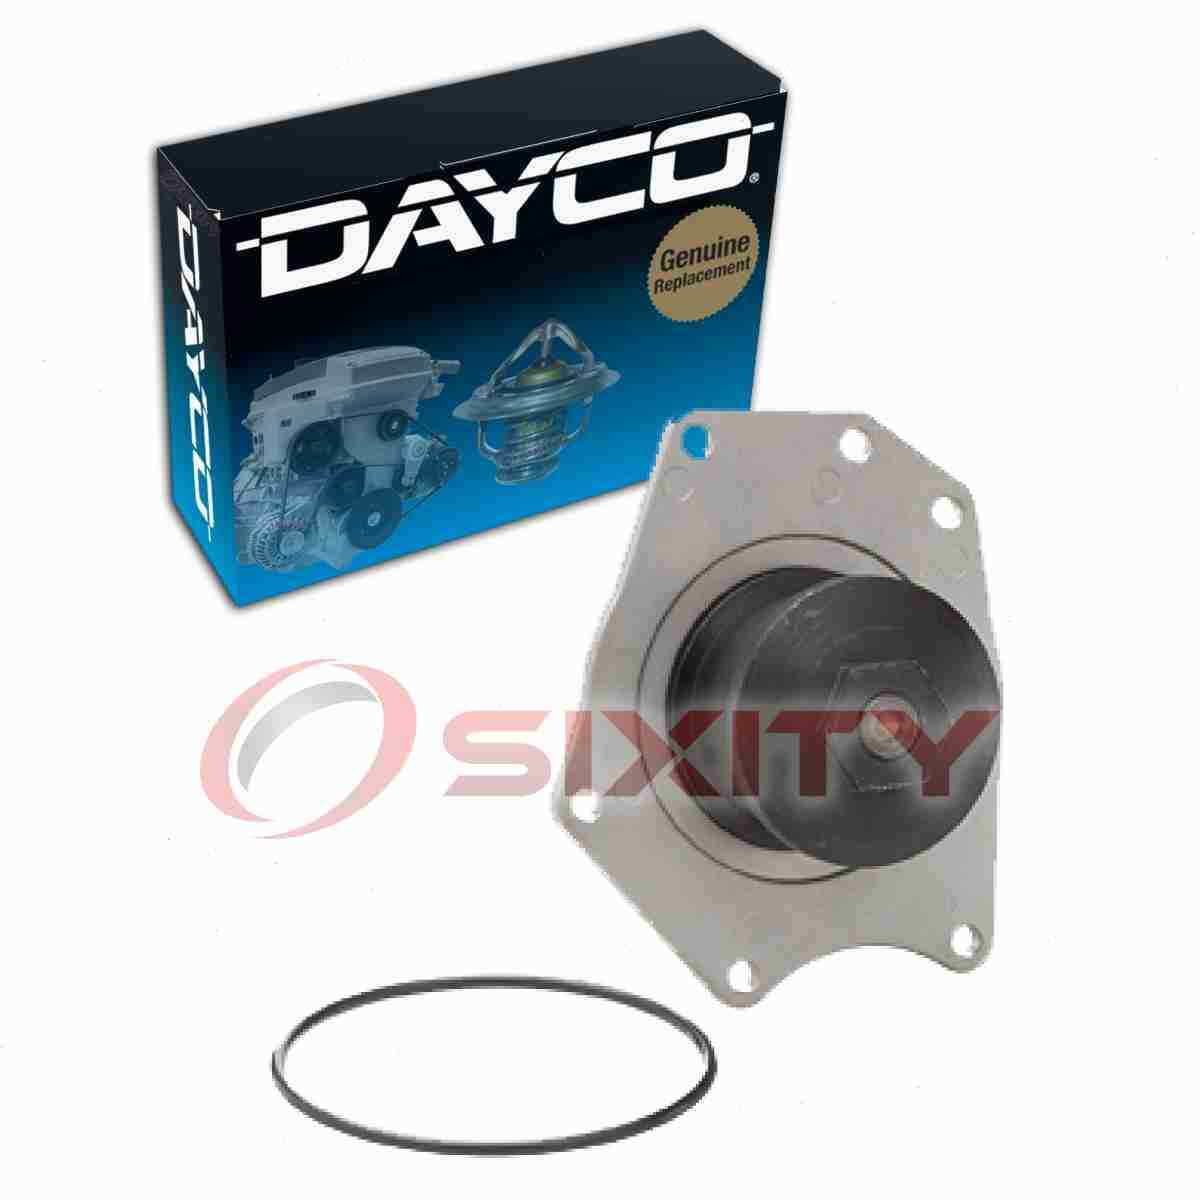 Dayco Engine Water Pump for 2001-2002 Chrysler Prowler Coolant Antifreeze ef